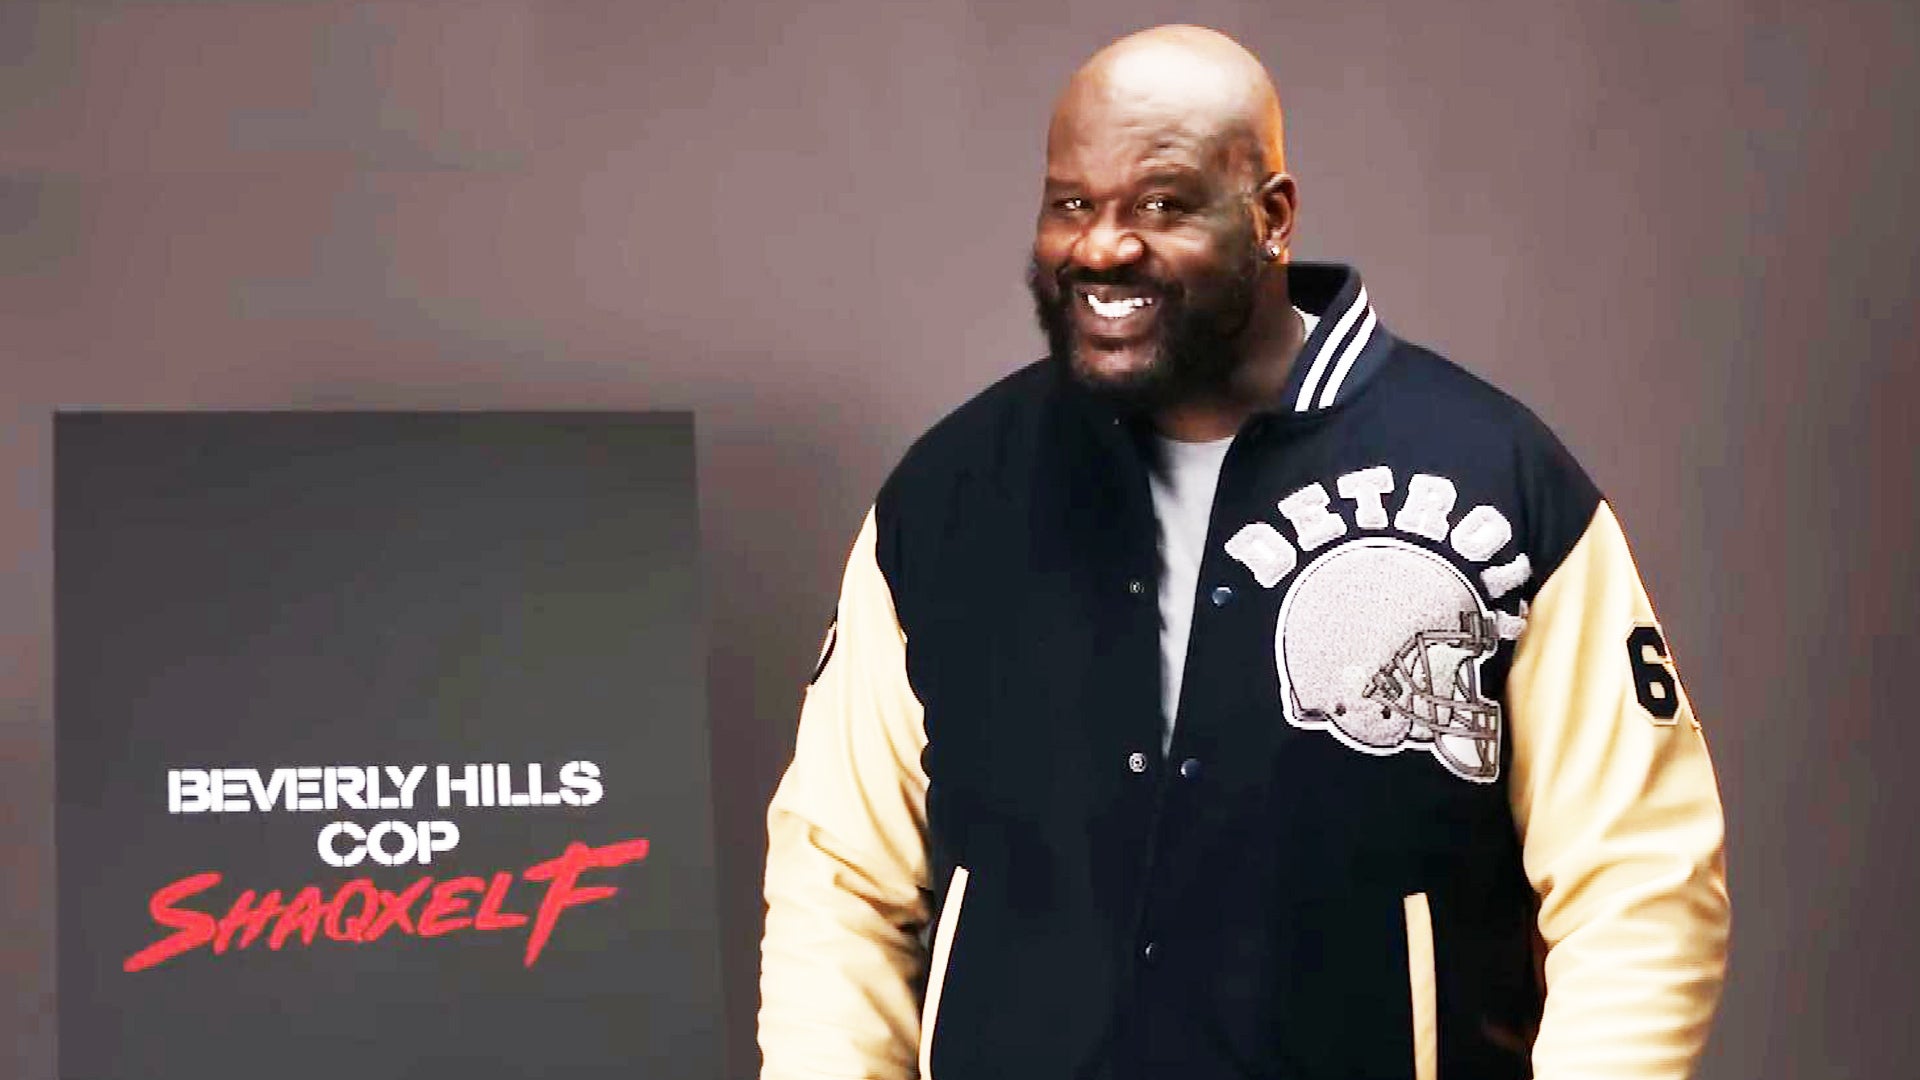 Shaquille O'Neal Gives His Best Eddie Murphy Impression in 'Beverly Hills Cop' Audition Tape